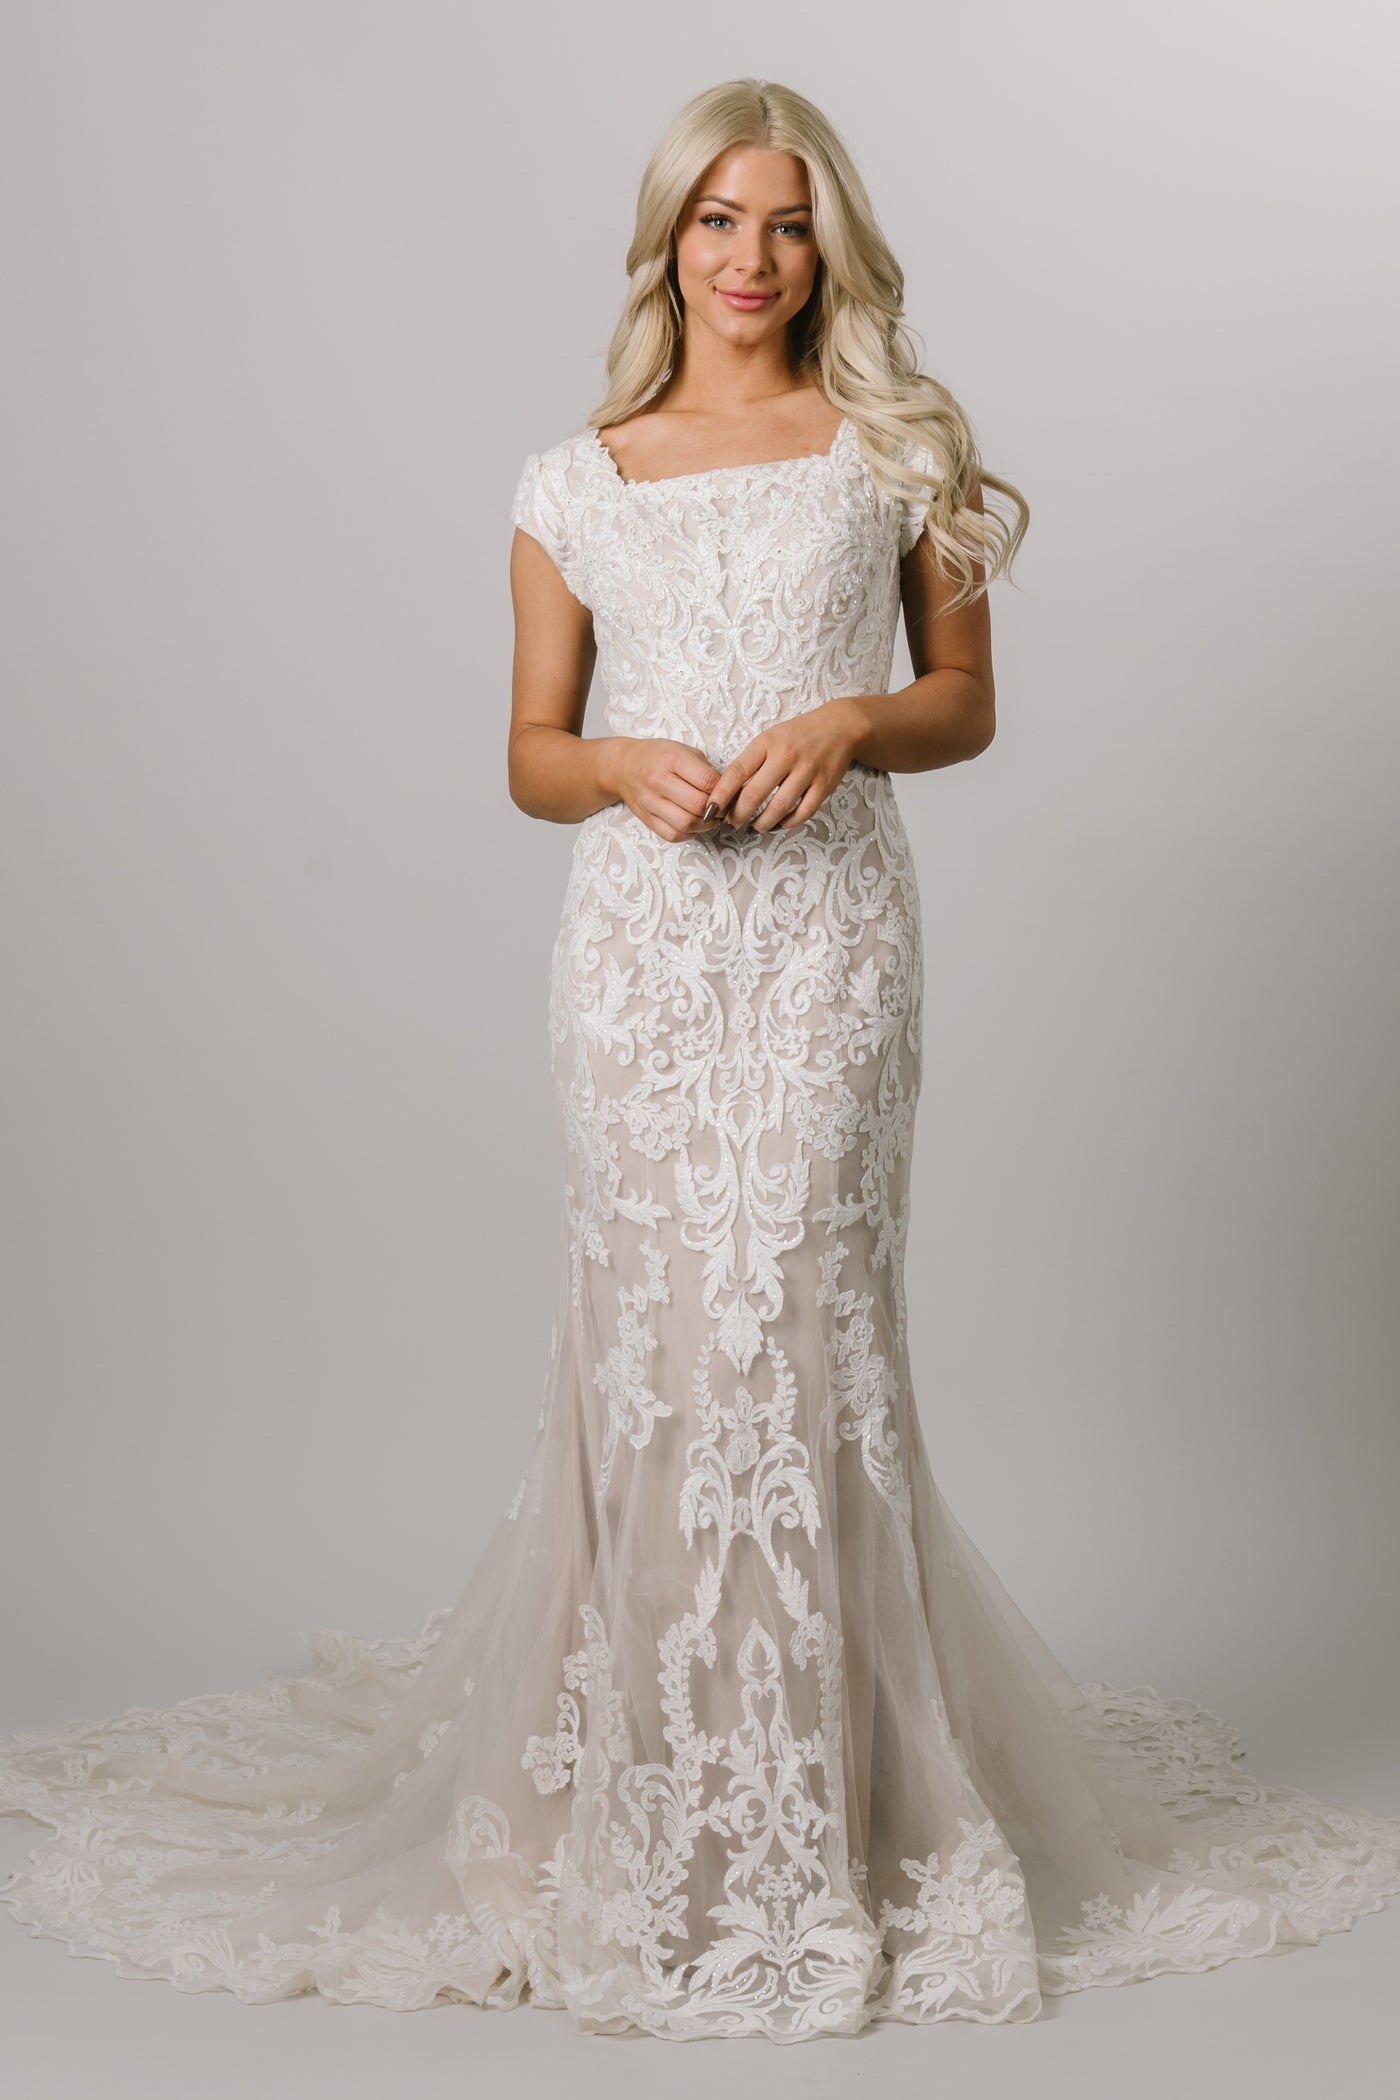 Modest wedding dress with a fitted silhouette square neck, and short sleeves.  